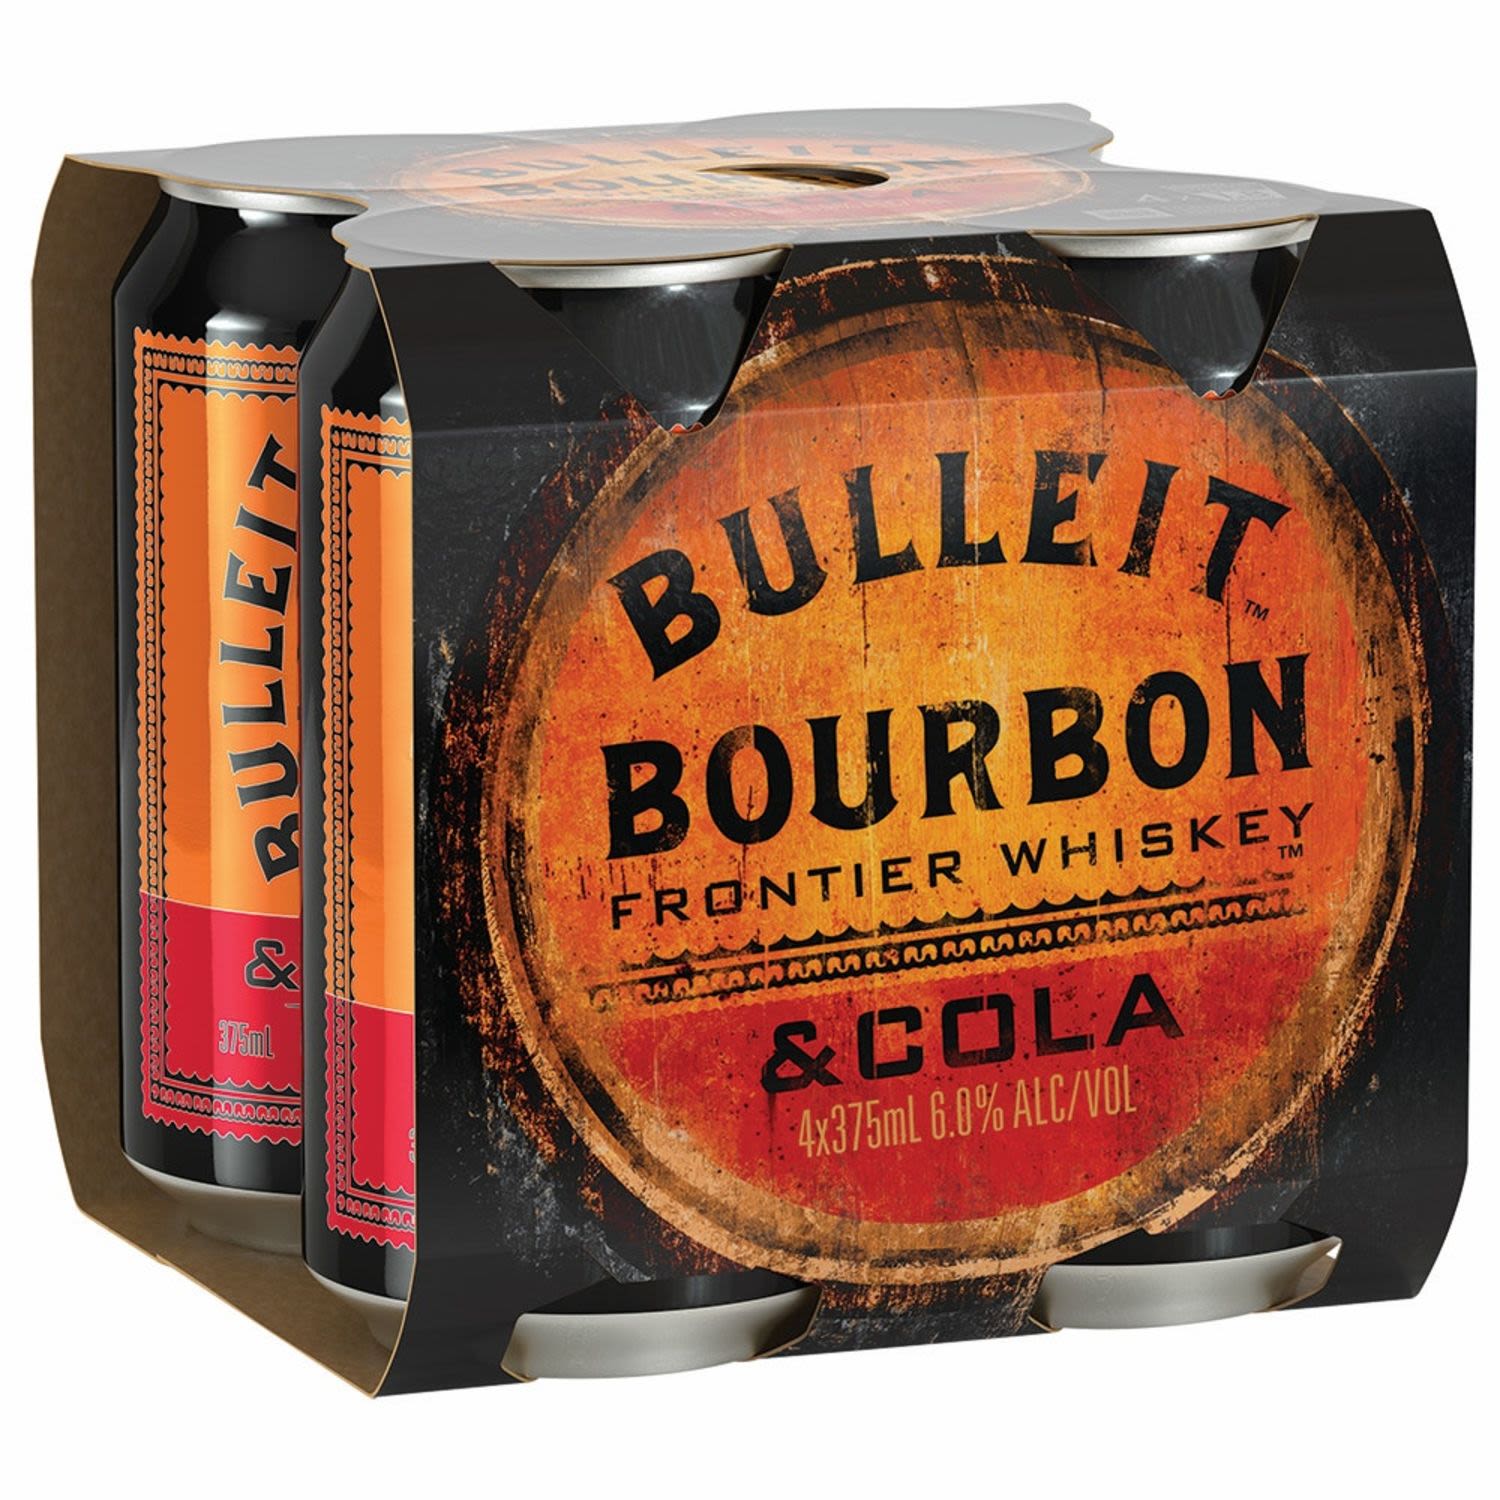 One of the driest of all bourbons, delivering a full-bodied and spicy taste with a long, smooth finish. Now pre-mixed in a can with cola ready for your convenience and enjoyment.<br /> <br />Alcohol Volume: 6.00%<br /><br />Pack Format: 4 Pack<br /><br />Standard Drinks: 1.8</br /><br />Pack Type: Can<br />